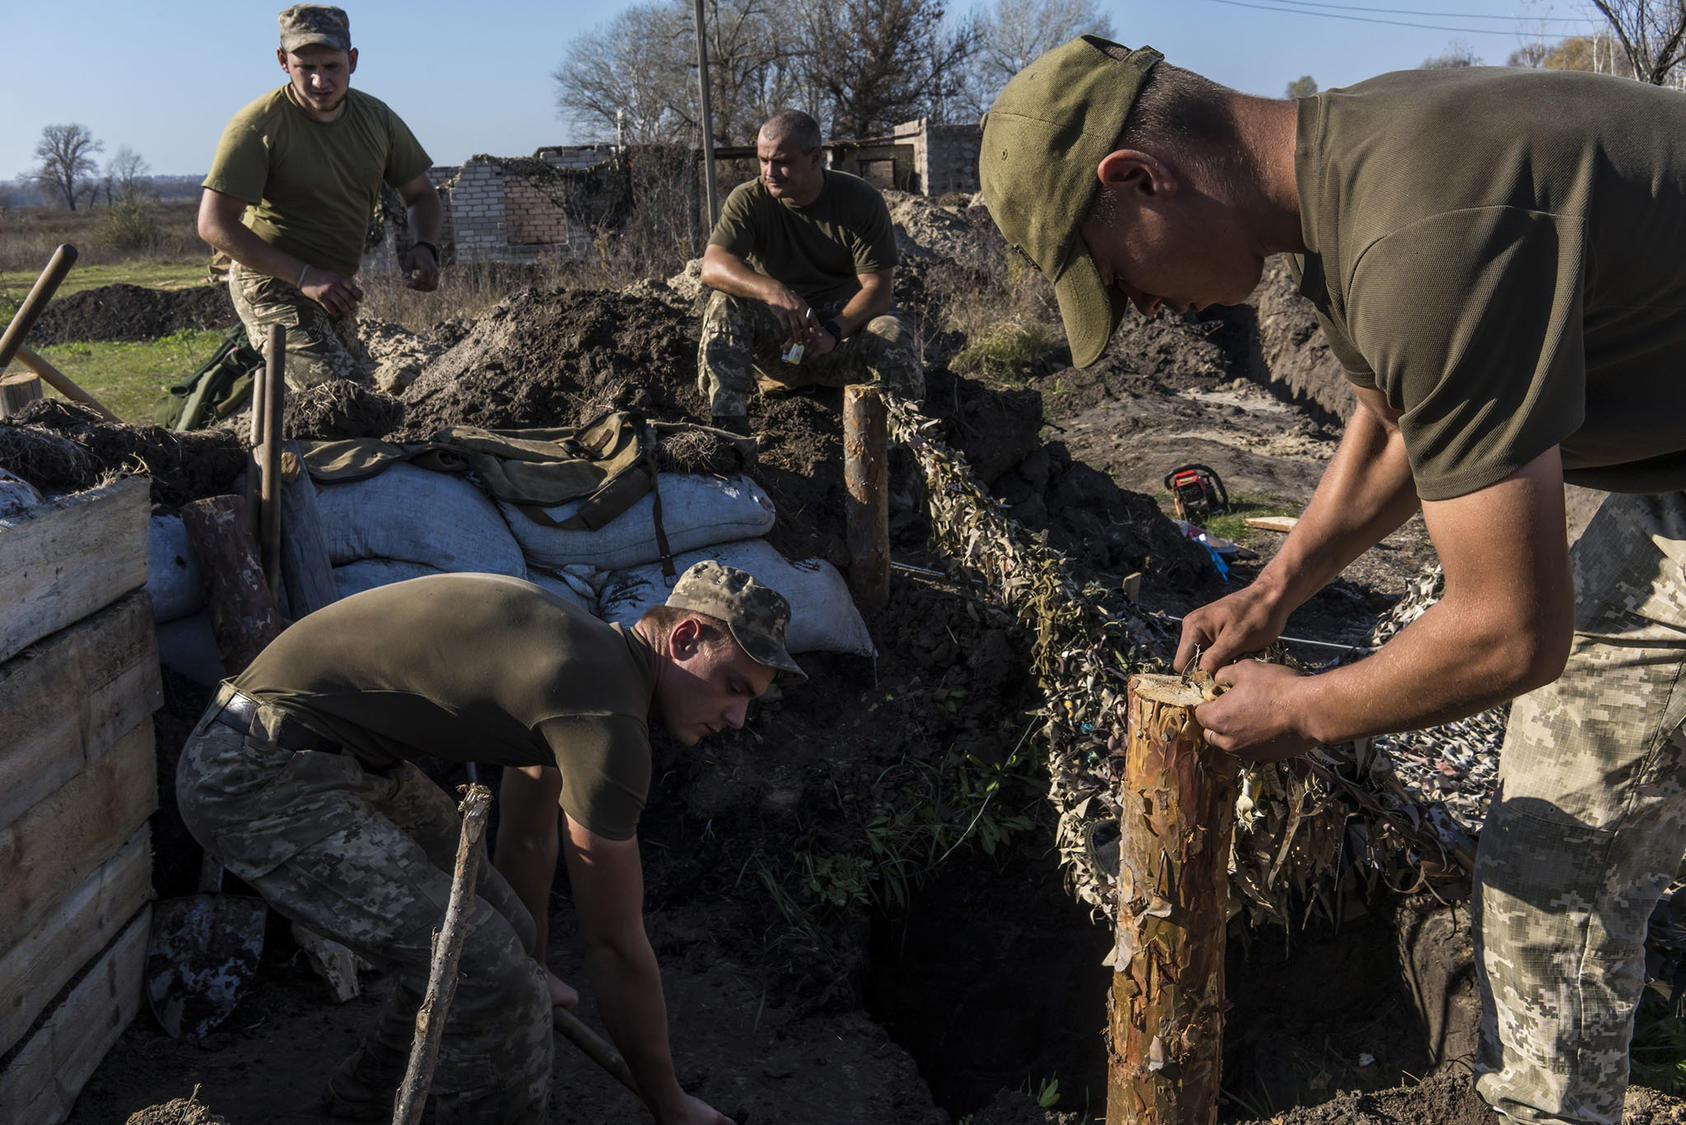 Ukrainian troops dig bunkers after withdrawing about 500 yards from the front line in the village of Stanytsia Luhanska. The pullback by both sides helped prepare for December 9 peace talks in the Russia-Ukraine war. (Brendan Hoffman/The New York Times)